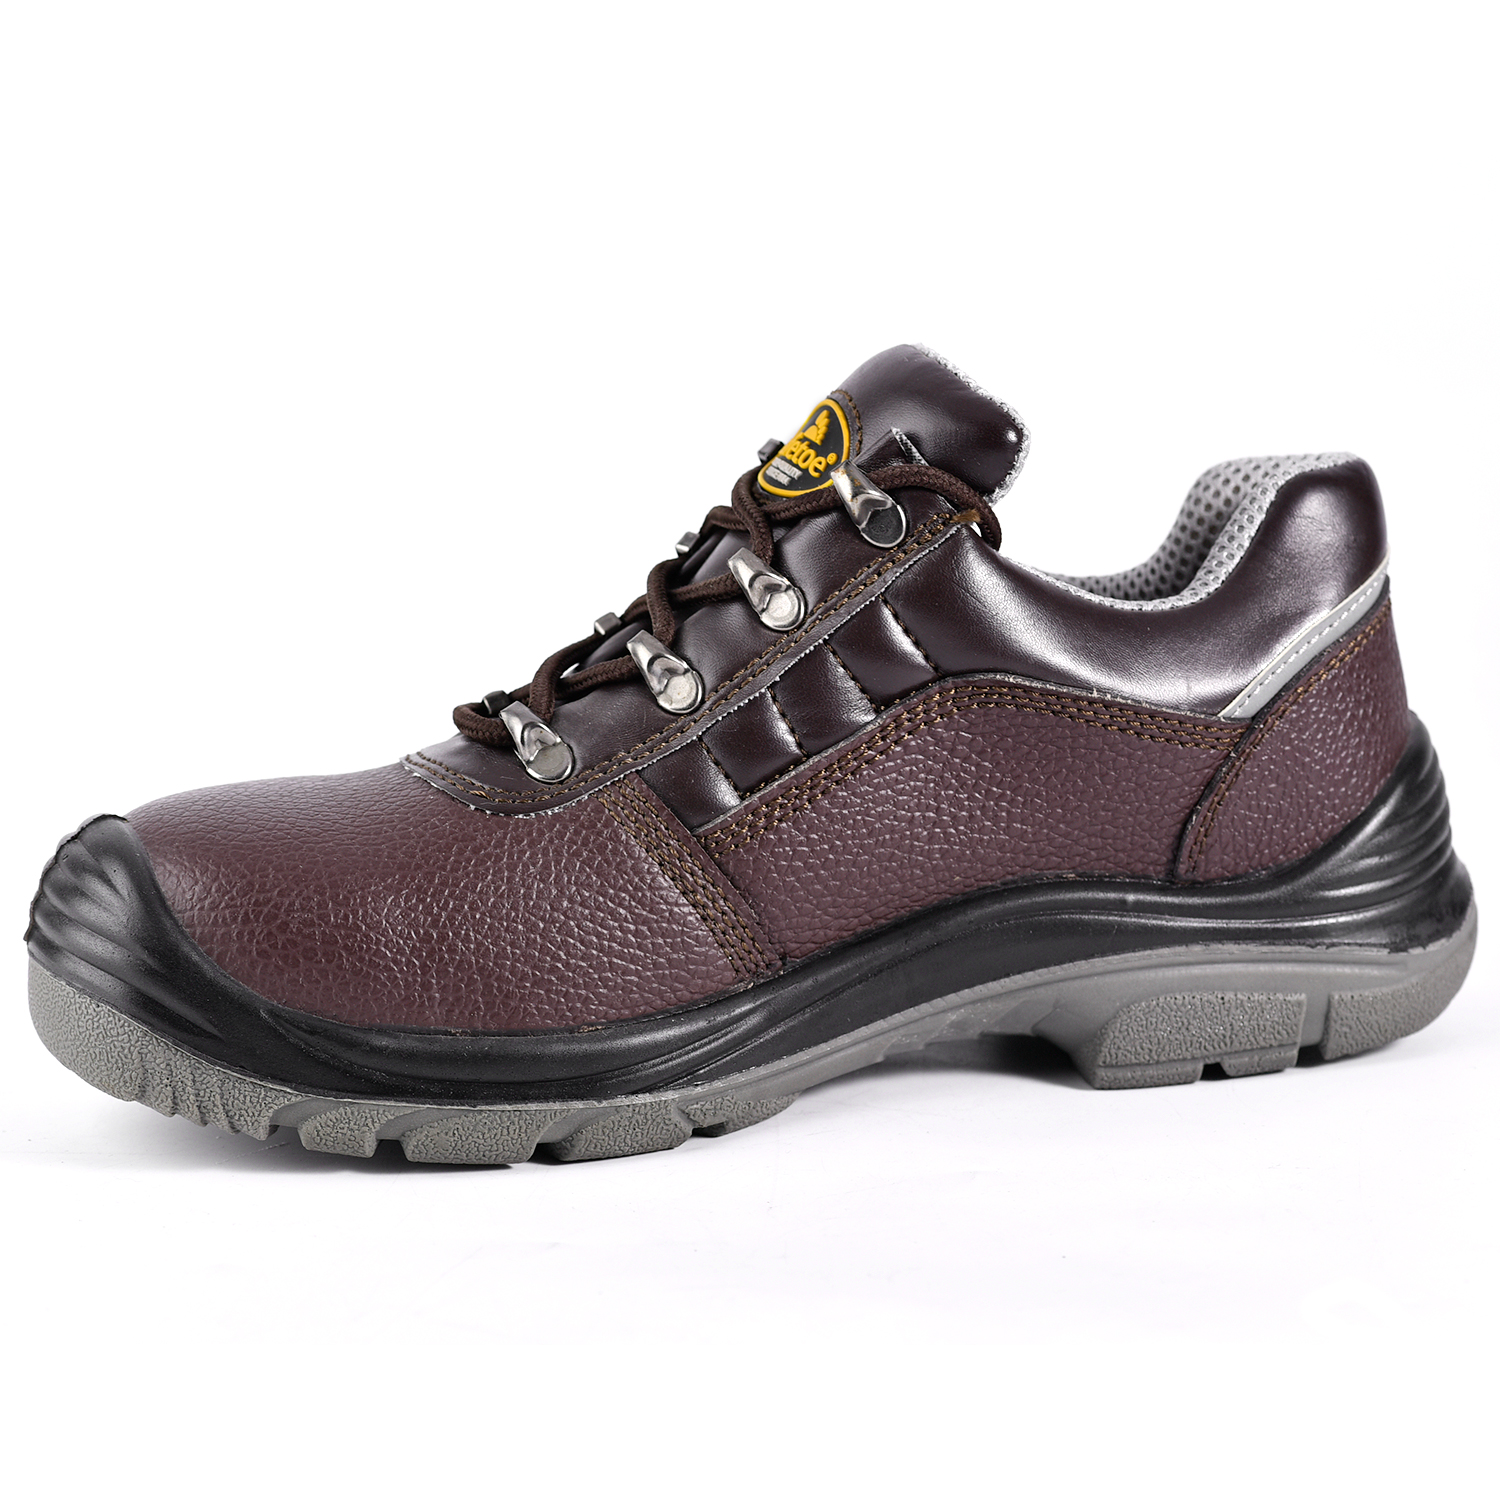 S3 Safety Shoes L-7163 Brown